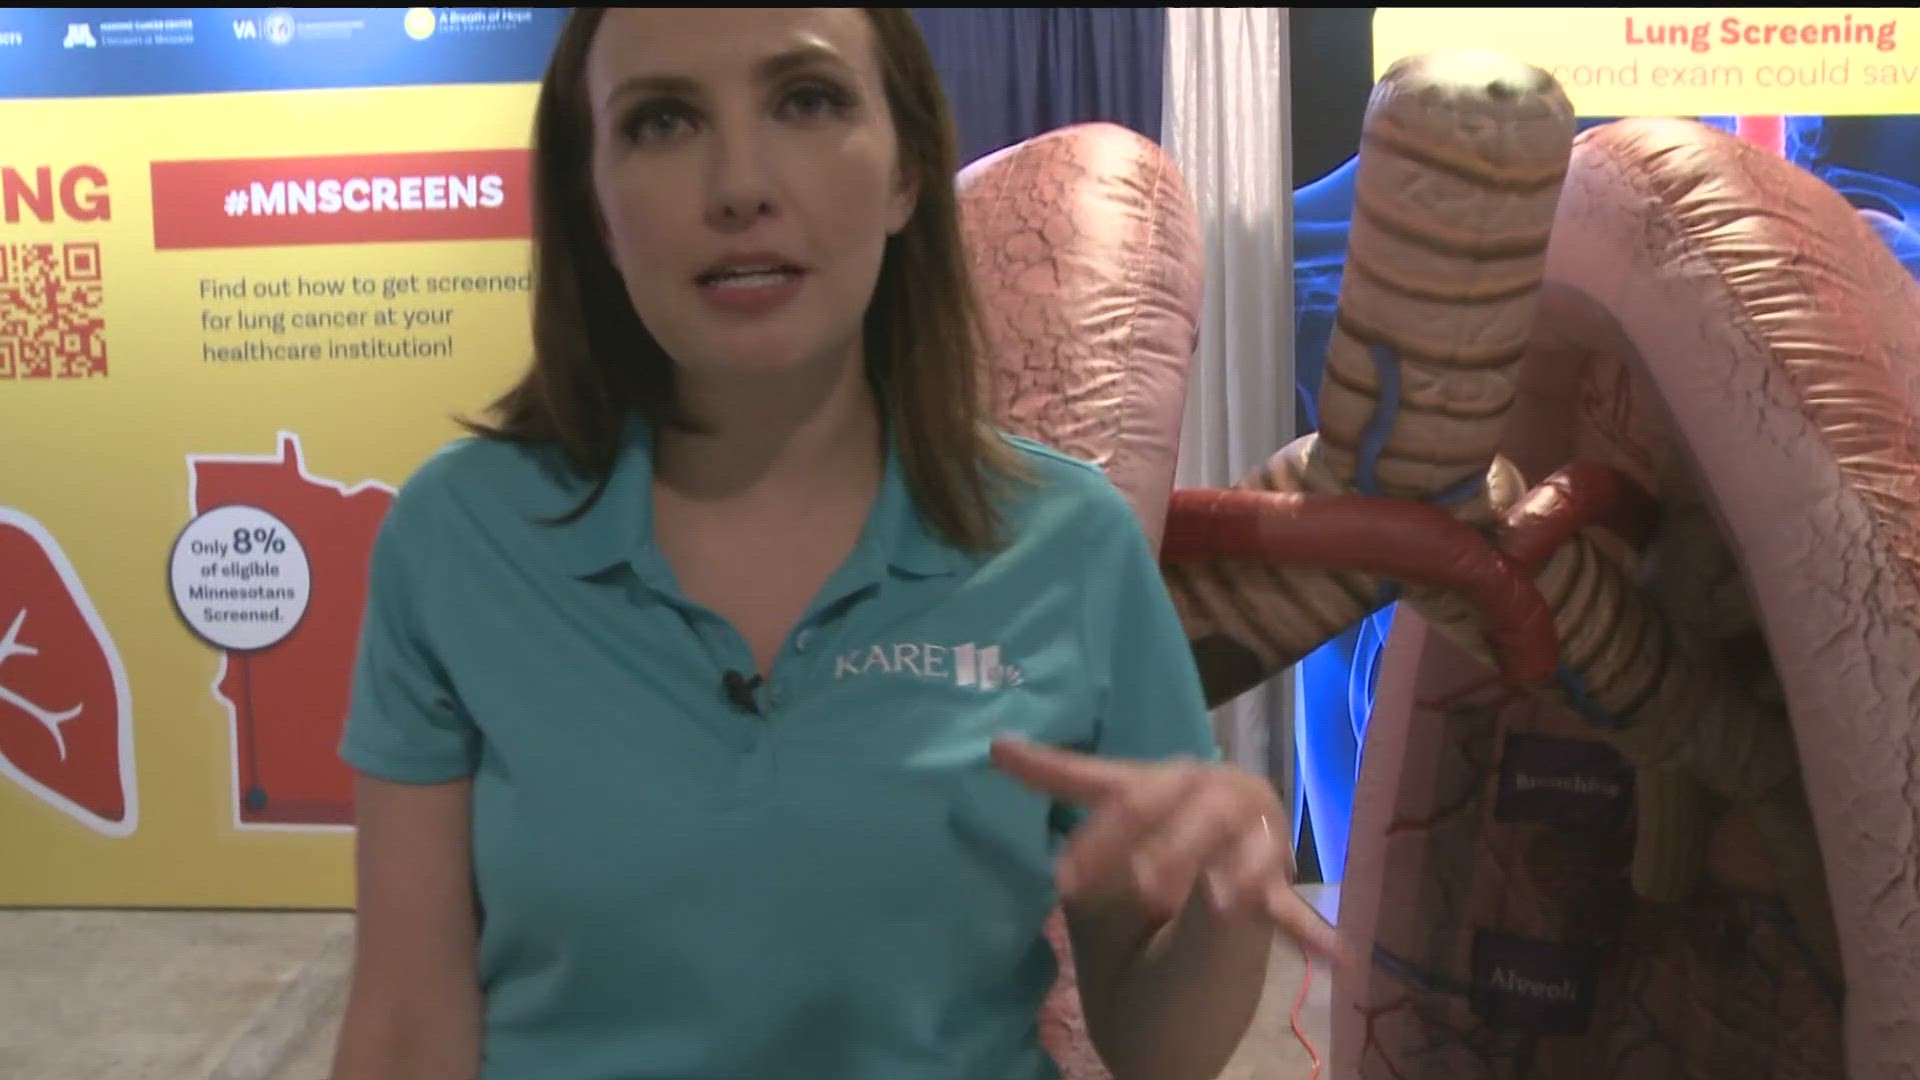 The Health Fair 11 booth has information on lung cancer symptoms at the Minnesota State Fair.